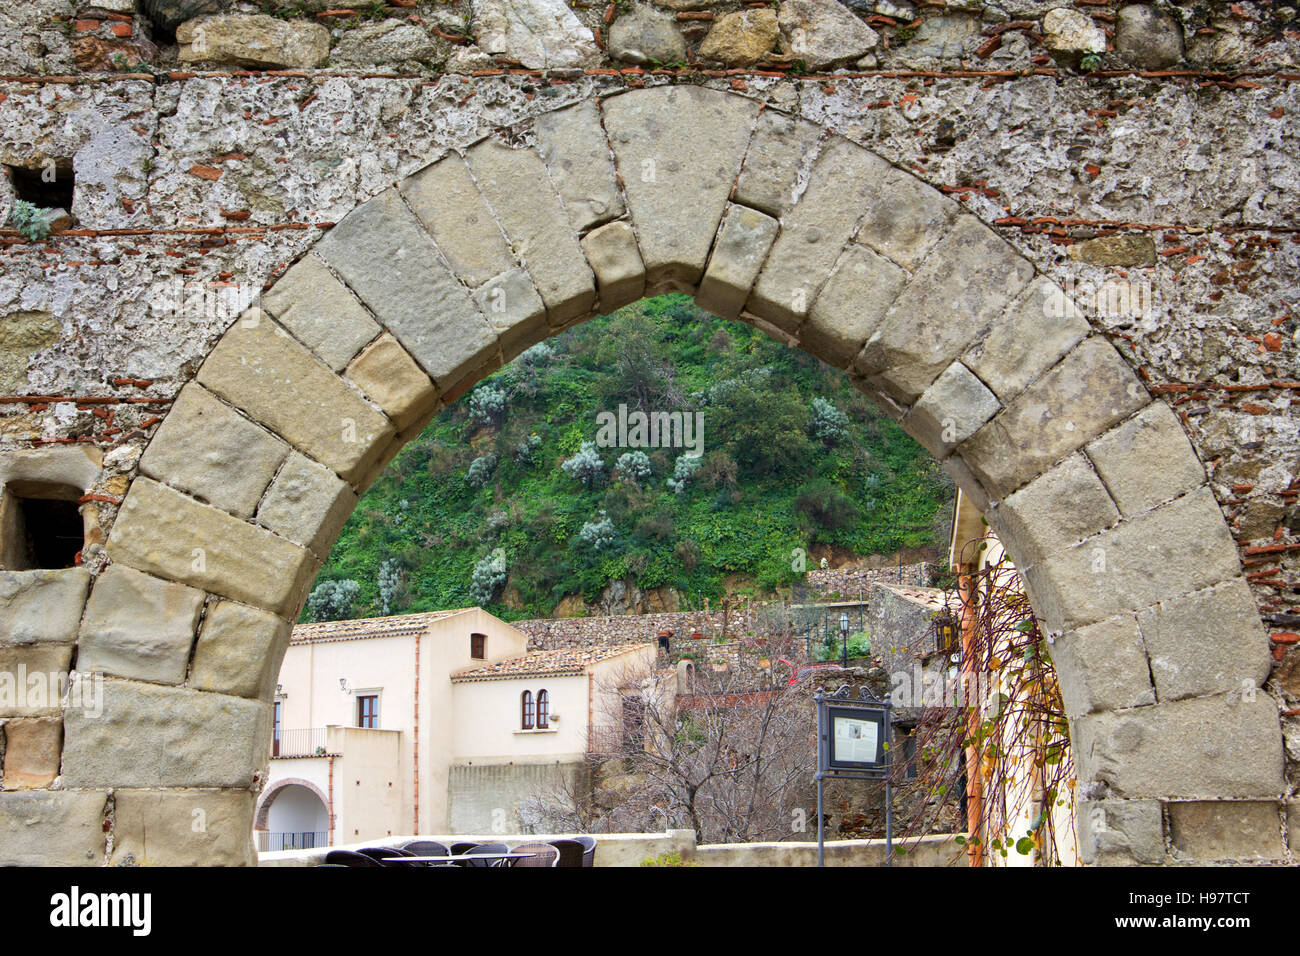 Ancient medieval entrance to the village of Savoca Stock Photo